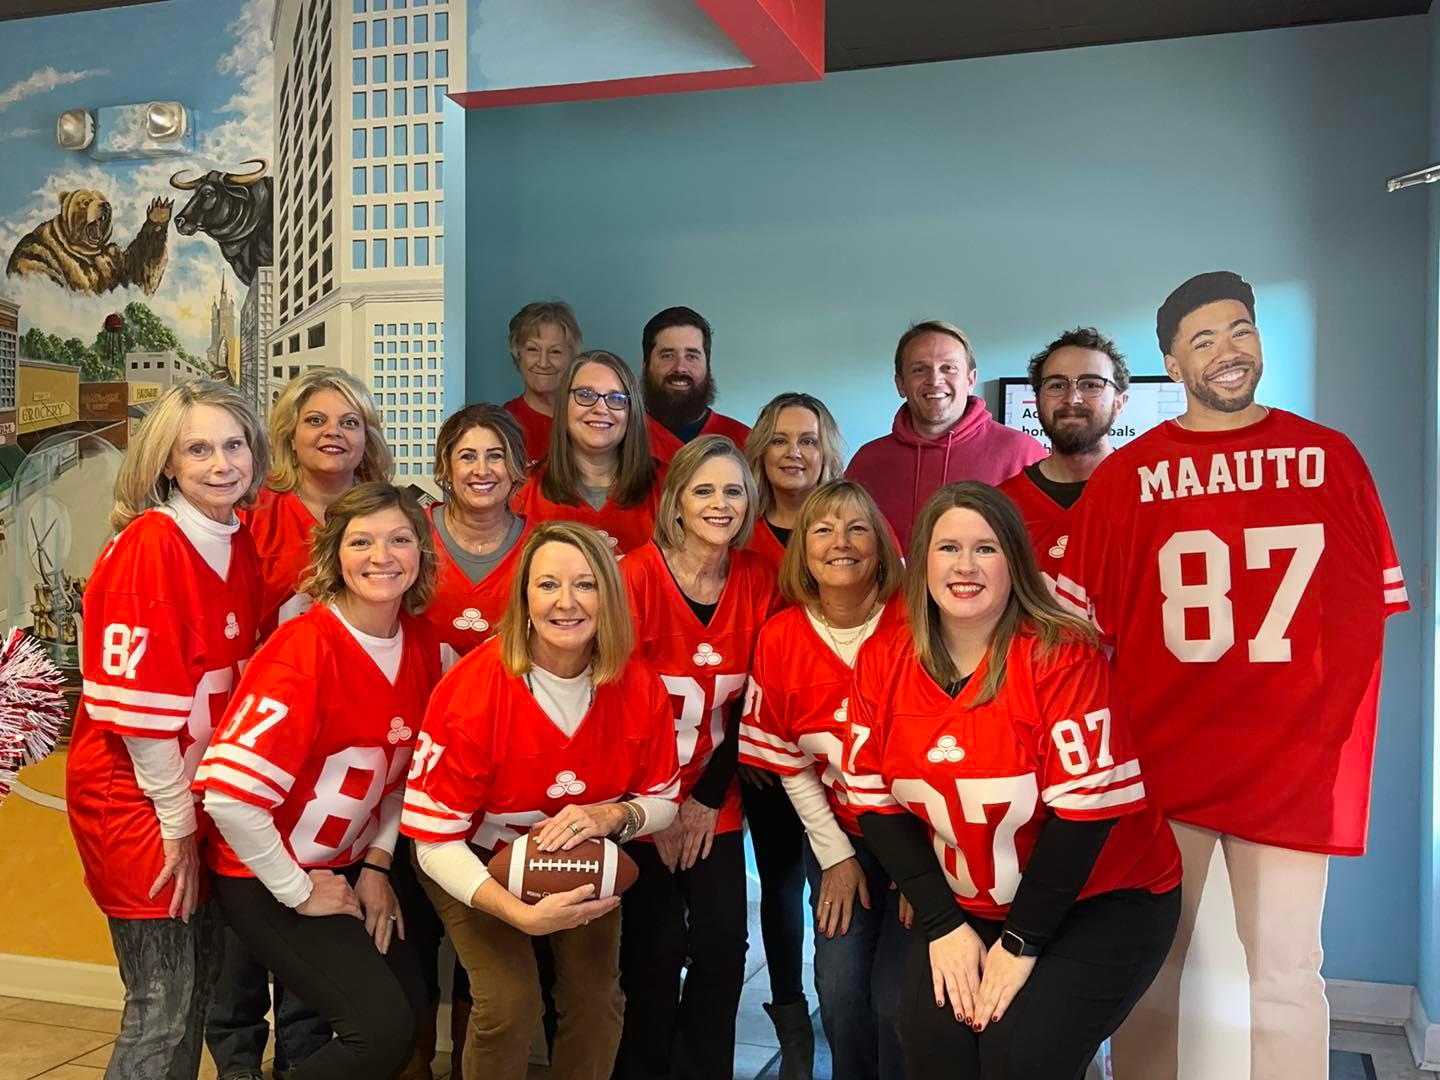 There are a lot of great teams to cheer for today. 🏈 No matter who wins- we have the best team around cheering for you everyday! ❤️#jeannieismyagent #ridewithnumber1 #awardwinningagency